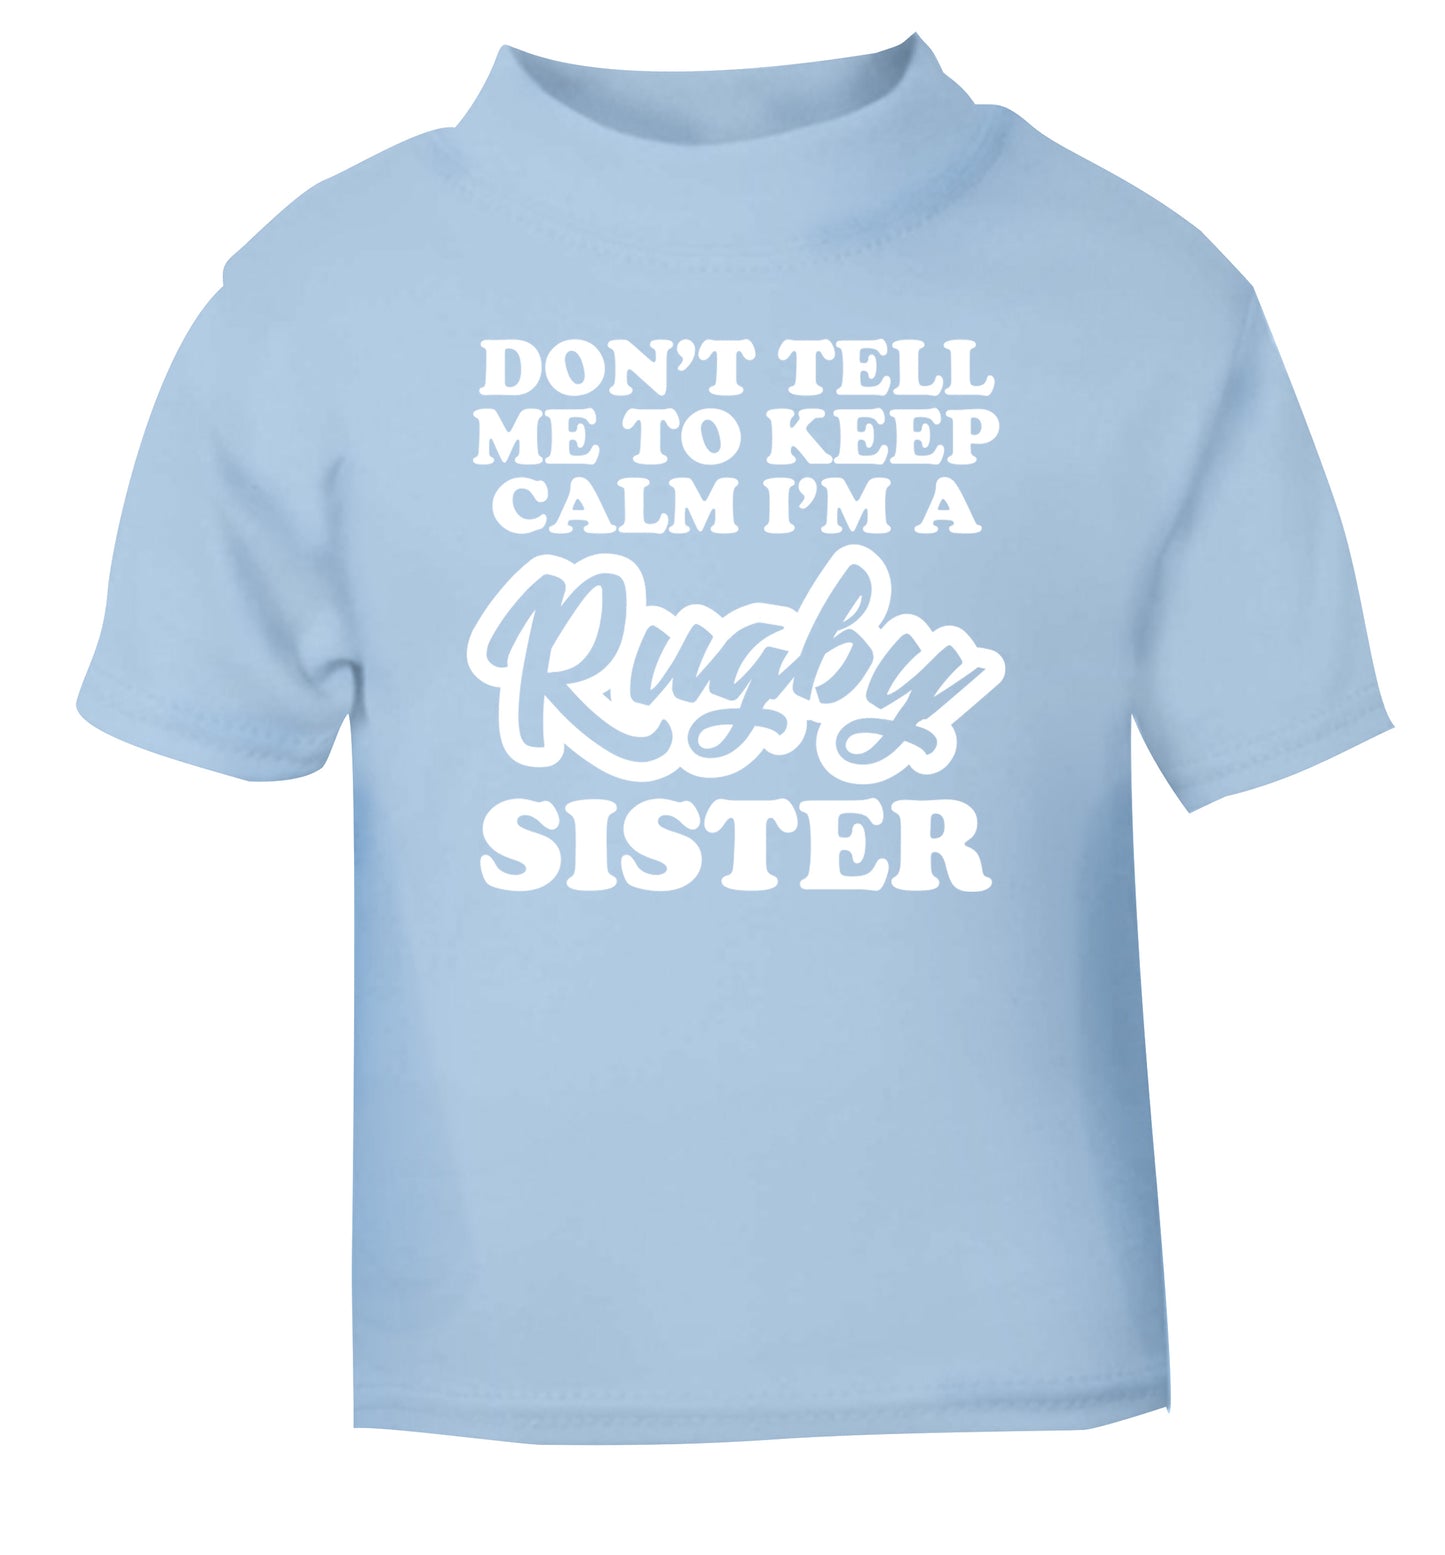 Don't tell me keep calm I'm a rugby sister light blue Baby Toddler Tshirt 2 Years